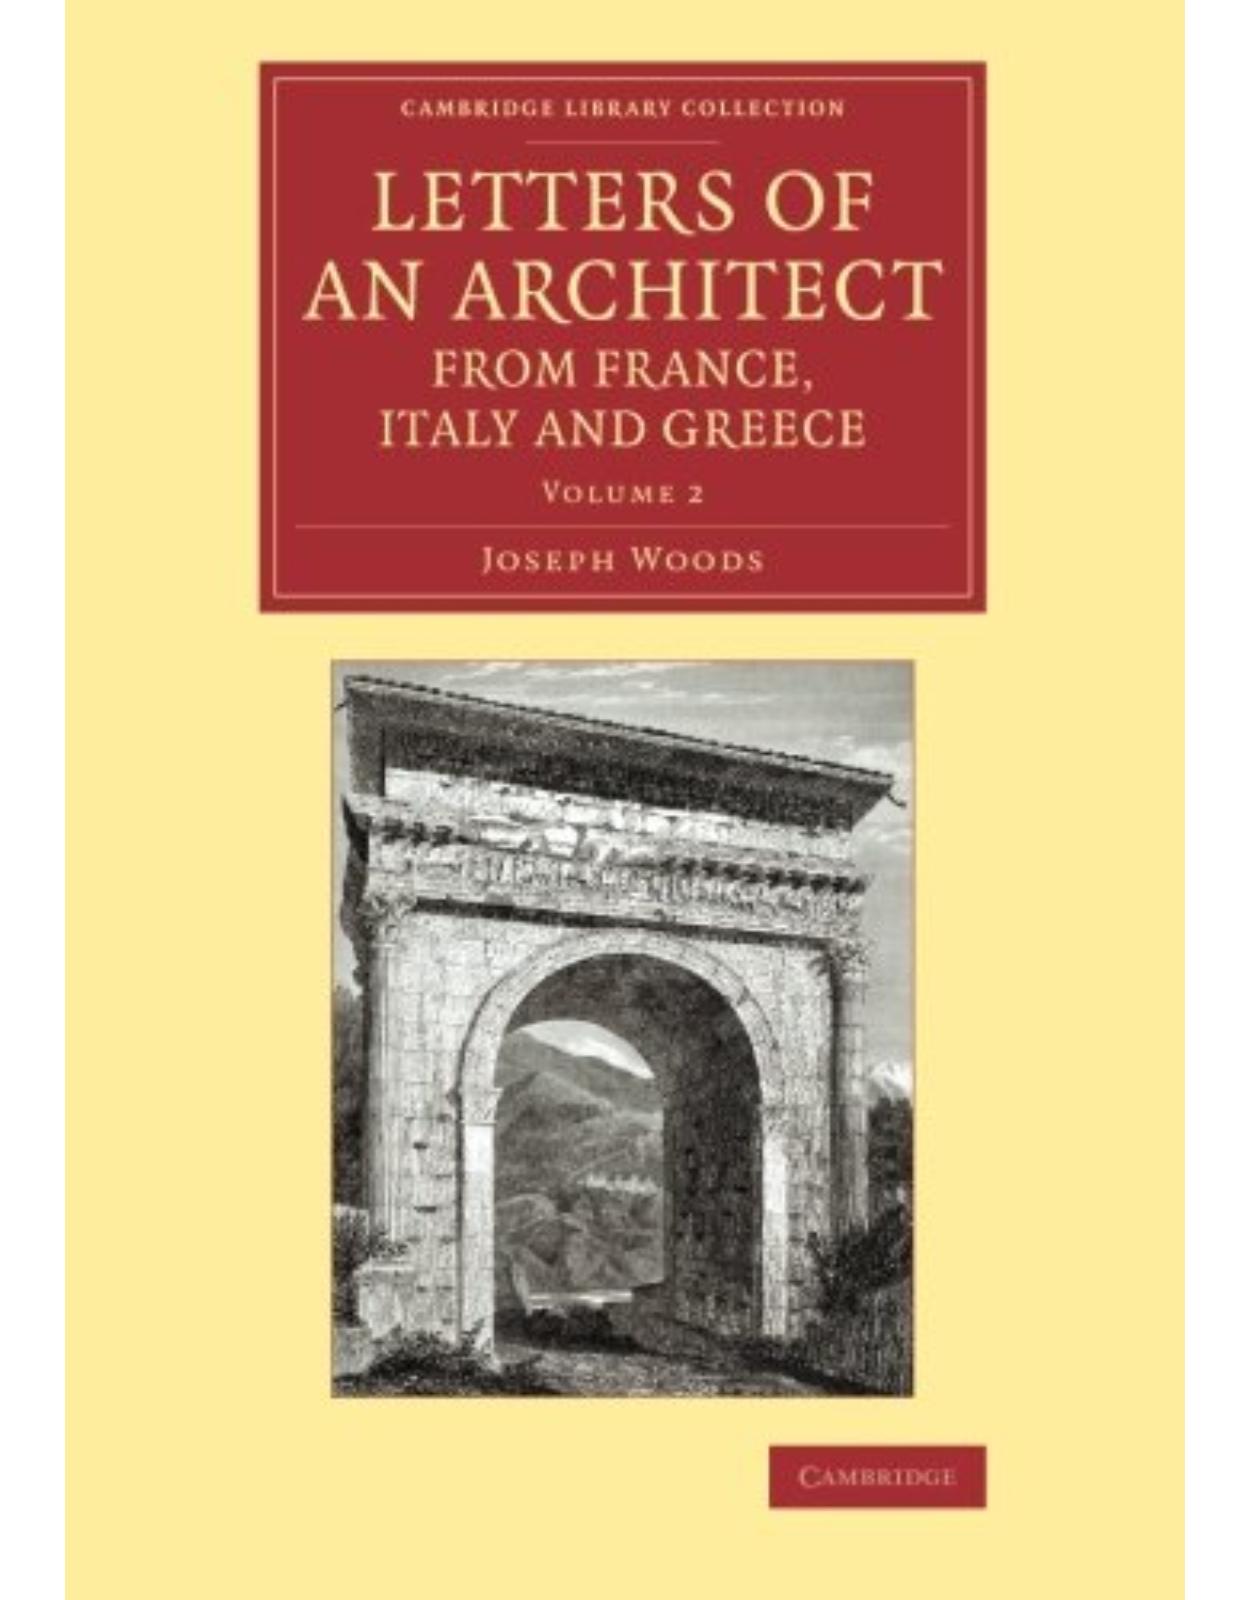 Letters of an Architect from France, Italy and Greece: Volume 2 (Cambridge Library Collection - Art and Architecture)